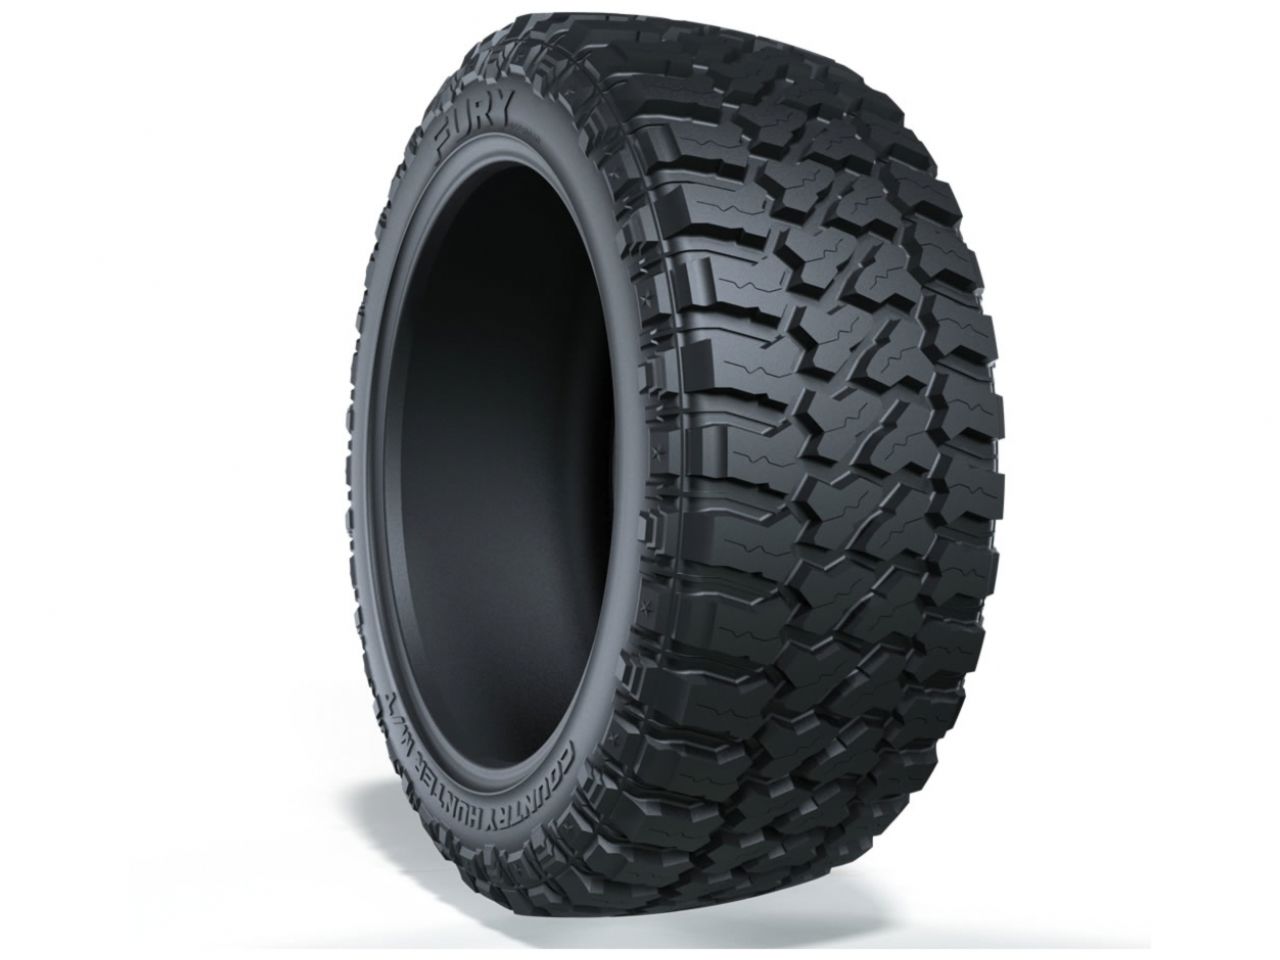 Fury Off Road 37x13.50R20 Tire, Country Hunter M/T